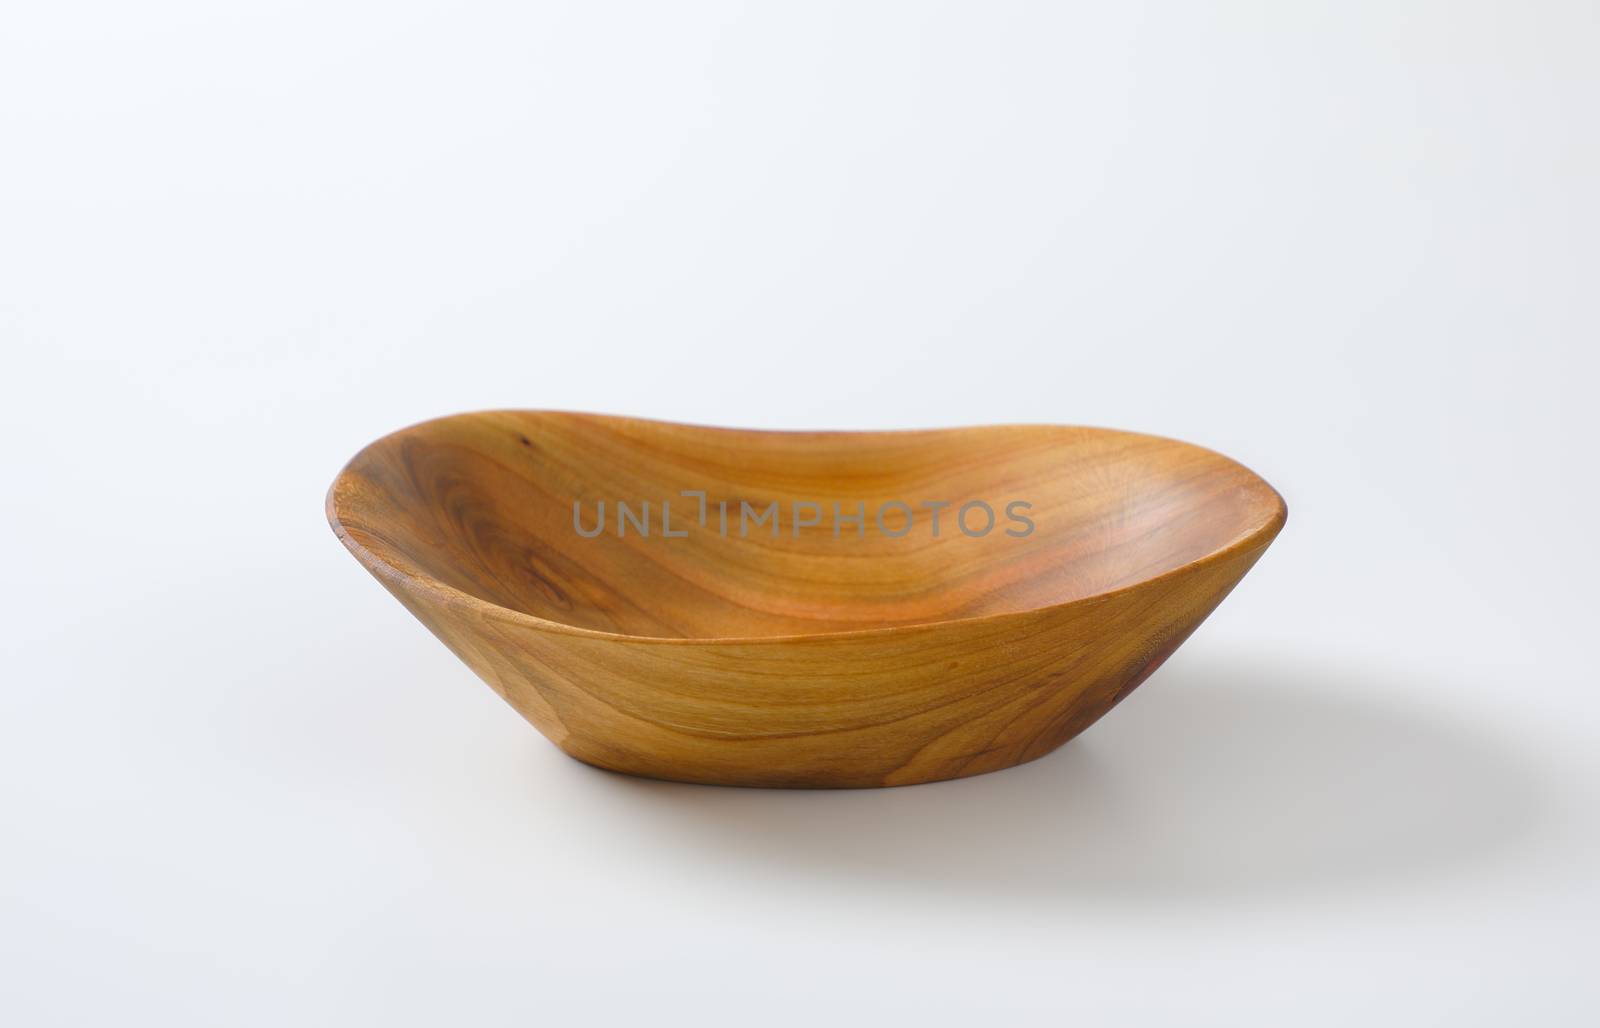 Hand carved wooden bowl by Digifoodstock